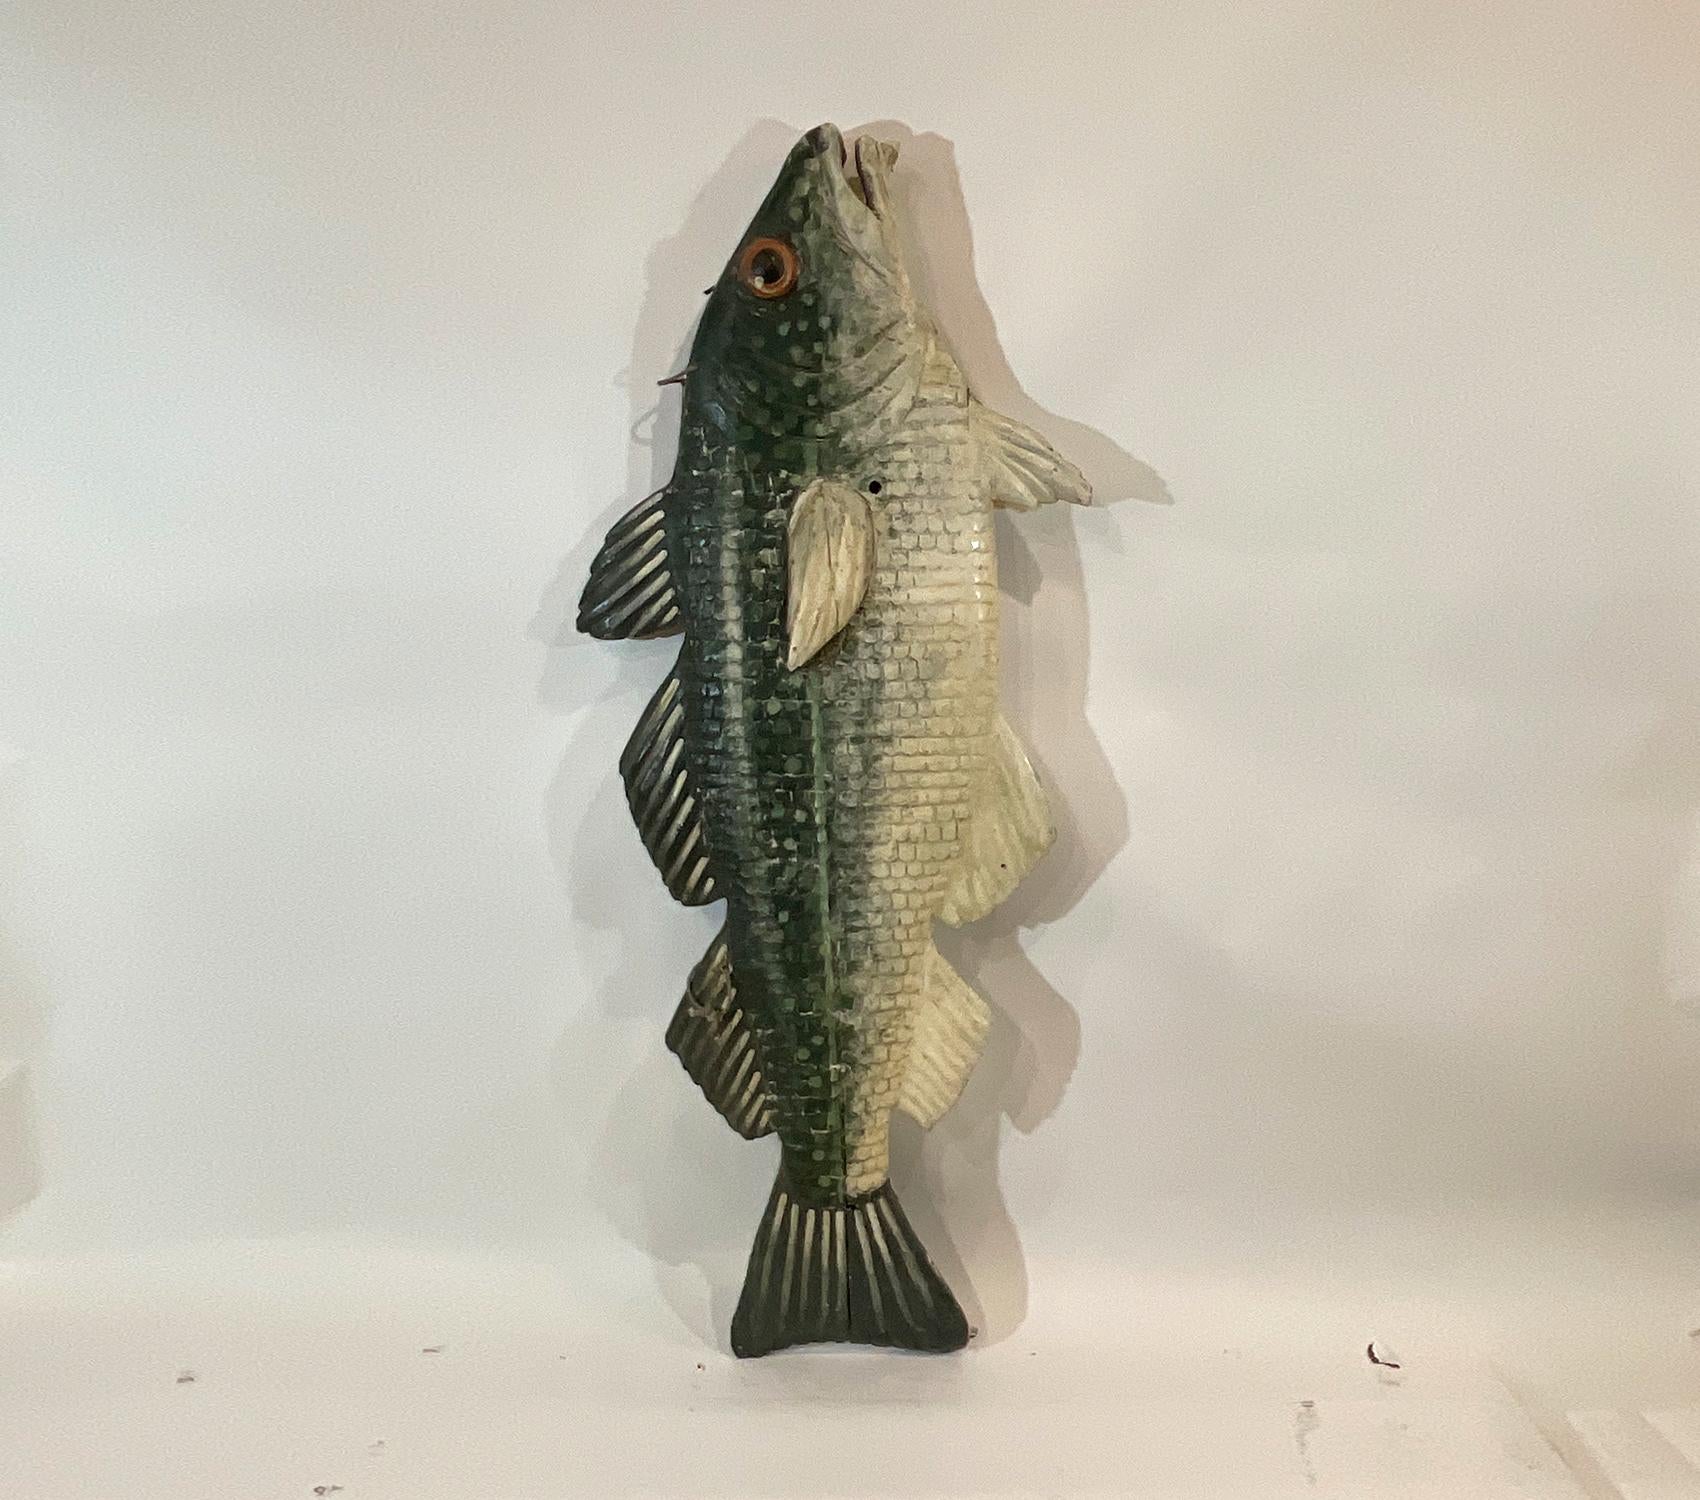 Carved wood fish from England. Six-foot fish with details including gills, fins, scales, snout, eyes, etc. Great finish in the style of the trade signs that the fishmongers would hang over their stalls in the English fish market